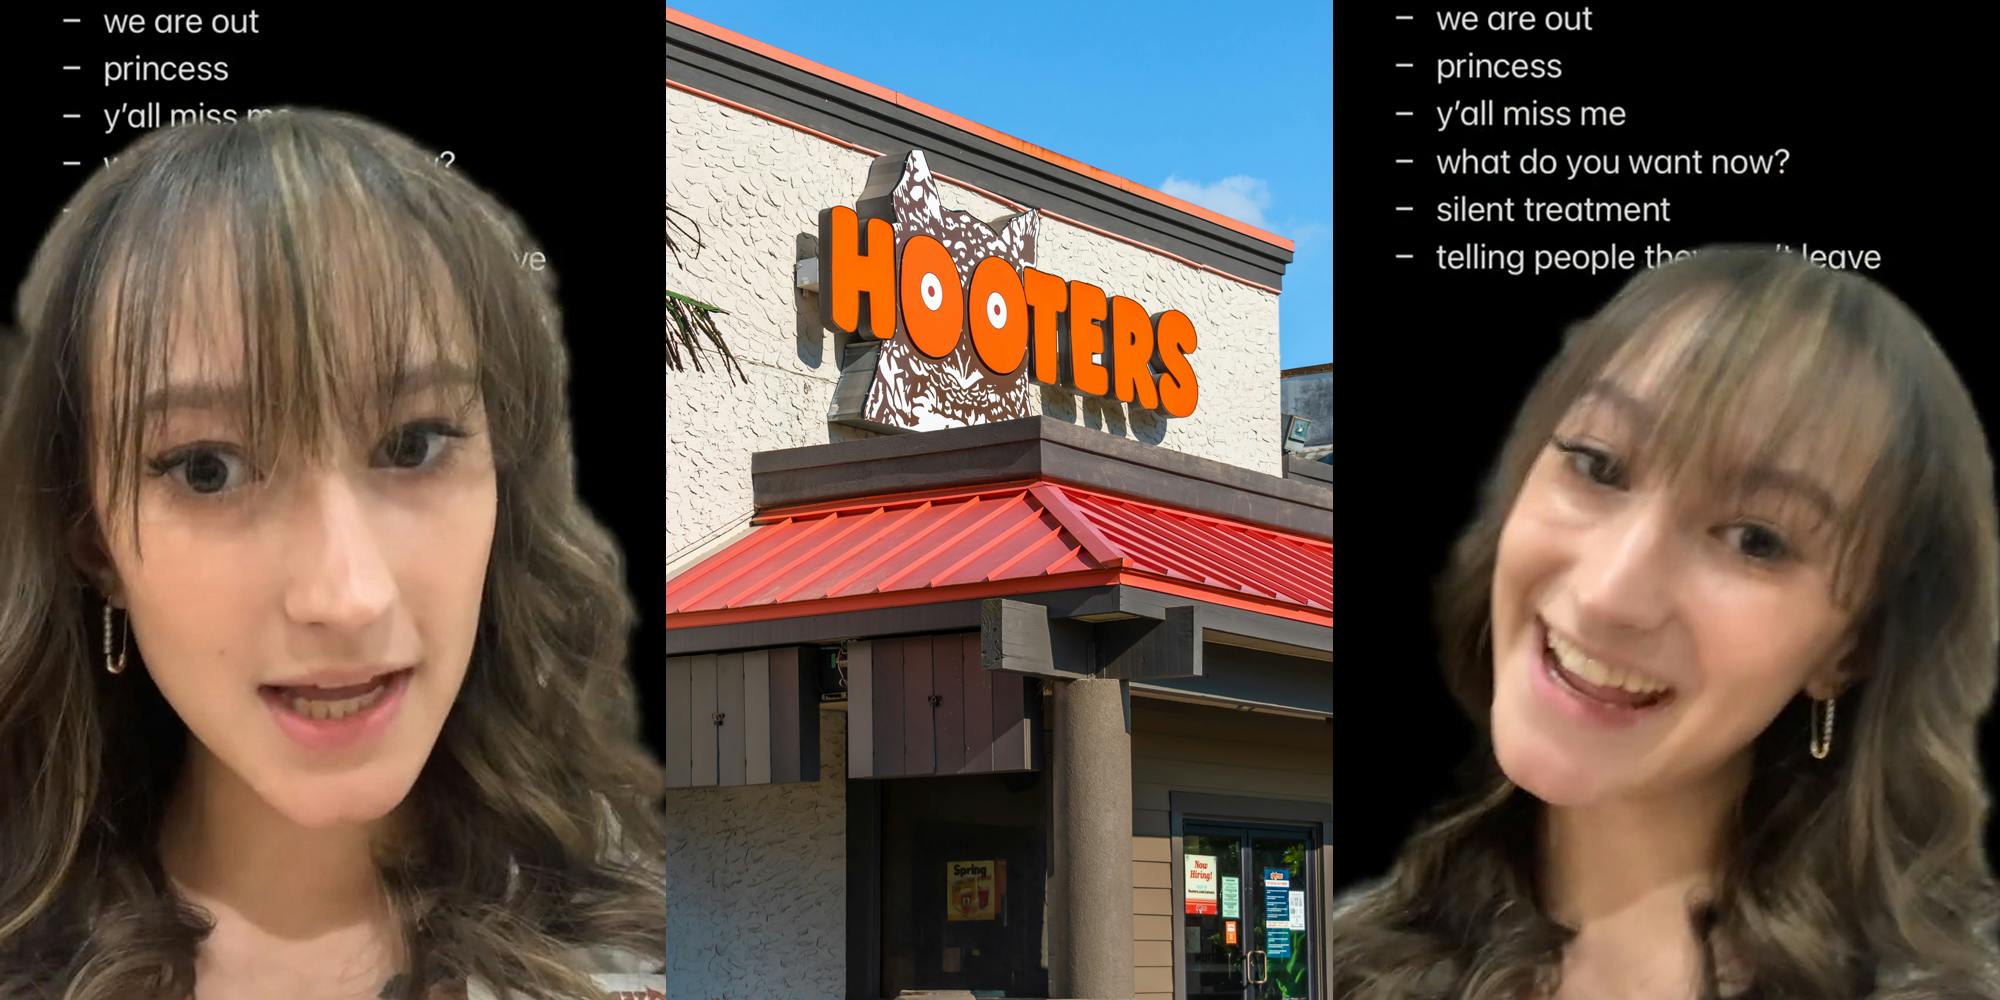 Hooter's employee greenscreen TikTok over list of bits "- we are out - princess - y'all miss me - what do you want now? - silent treatment - telling people they can't leave" (l) Hooter's building with sign (c) Hooter's employee greenscreen TikTok over list of bits "- we are out - princess - y'all miss me - what do you want now? - silent treatment - telling people they can't leave" (r)